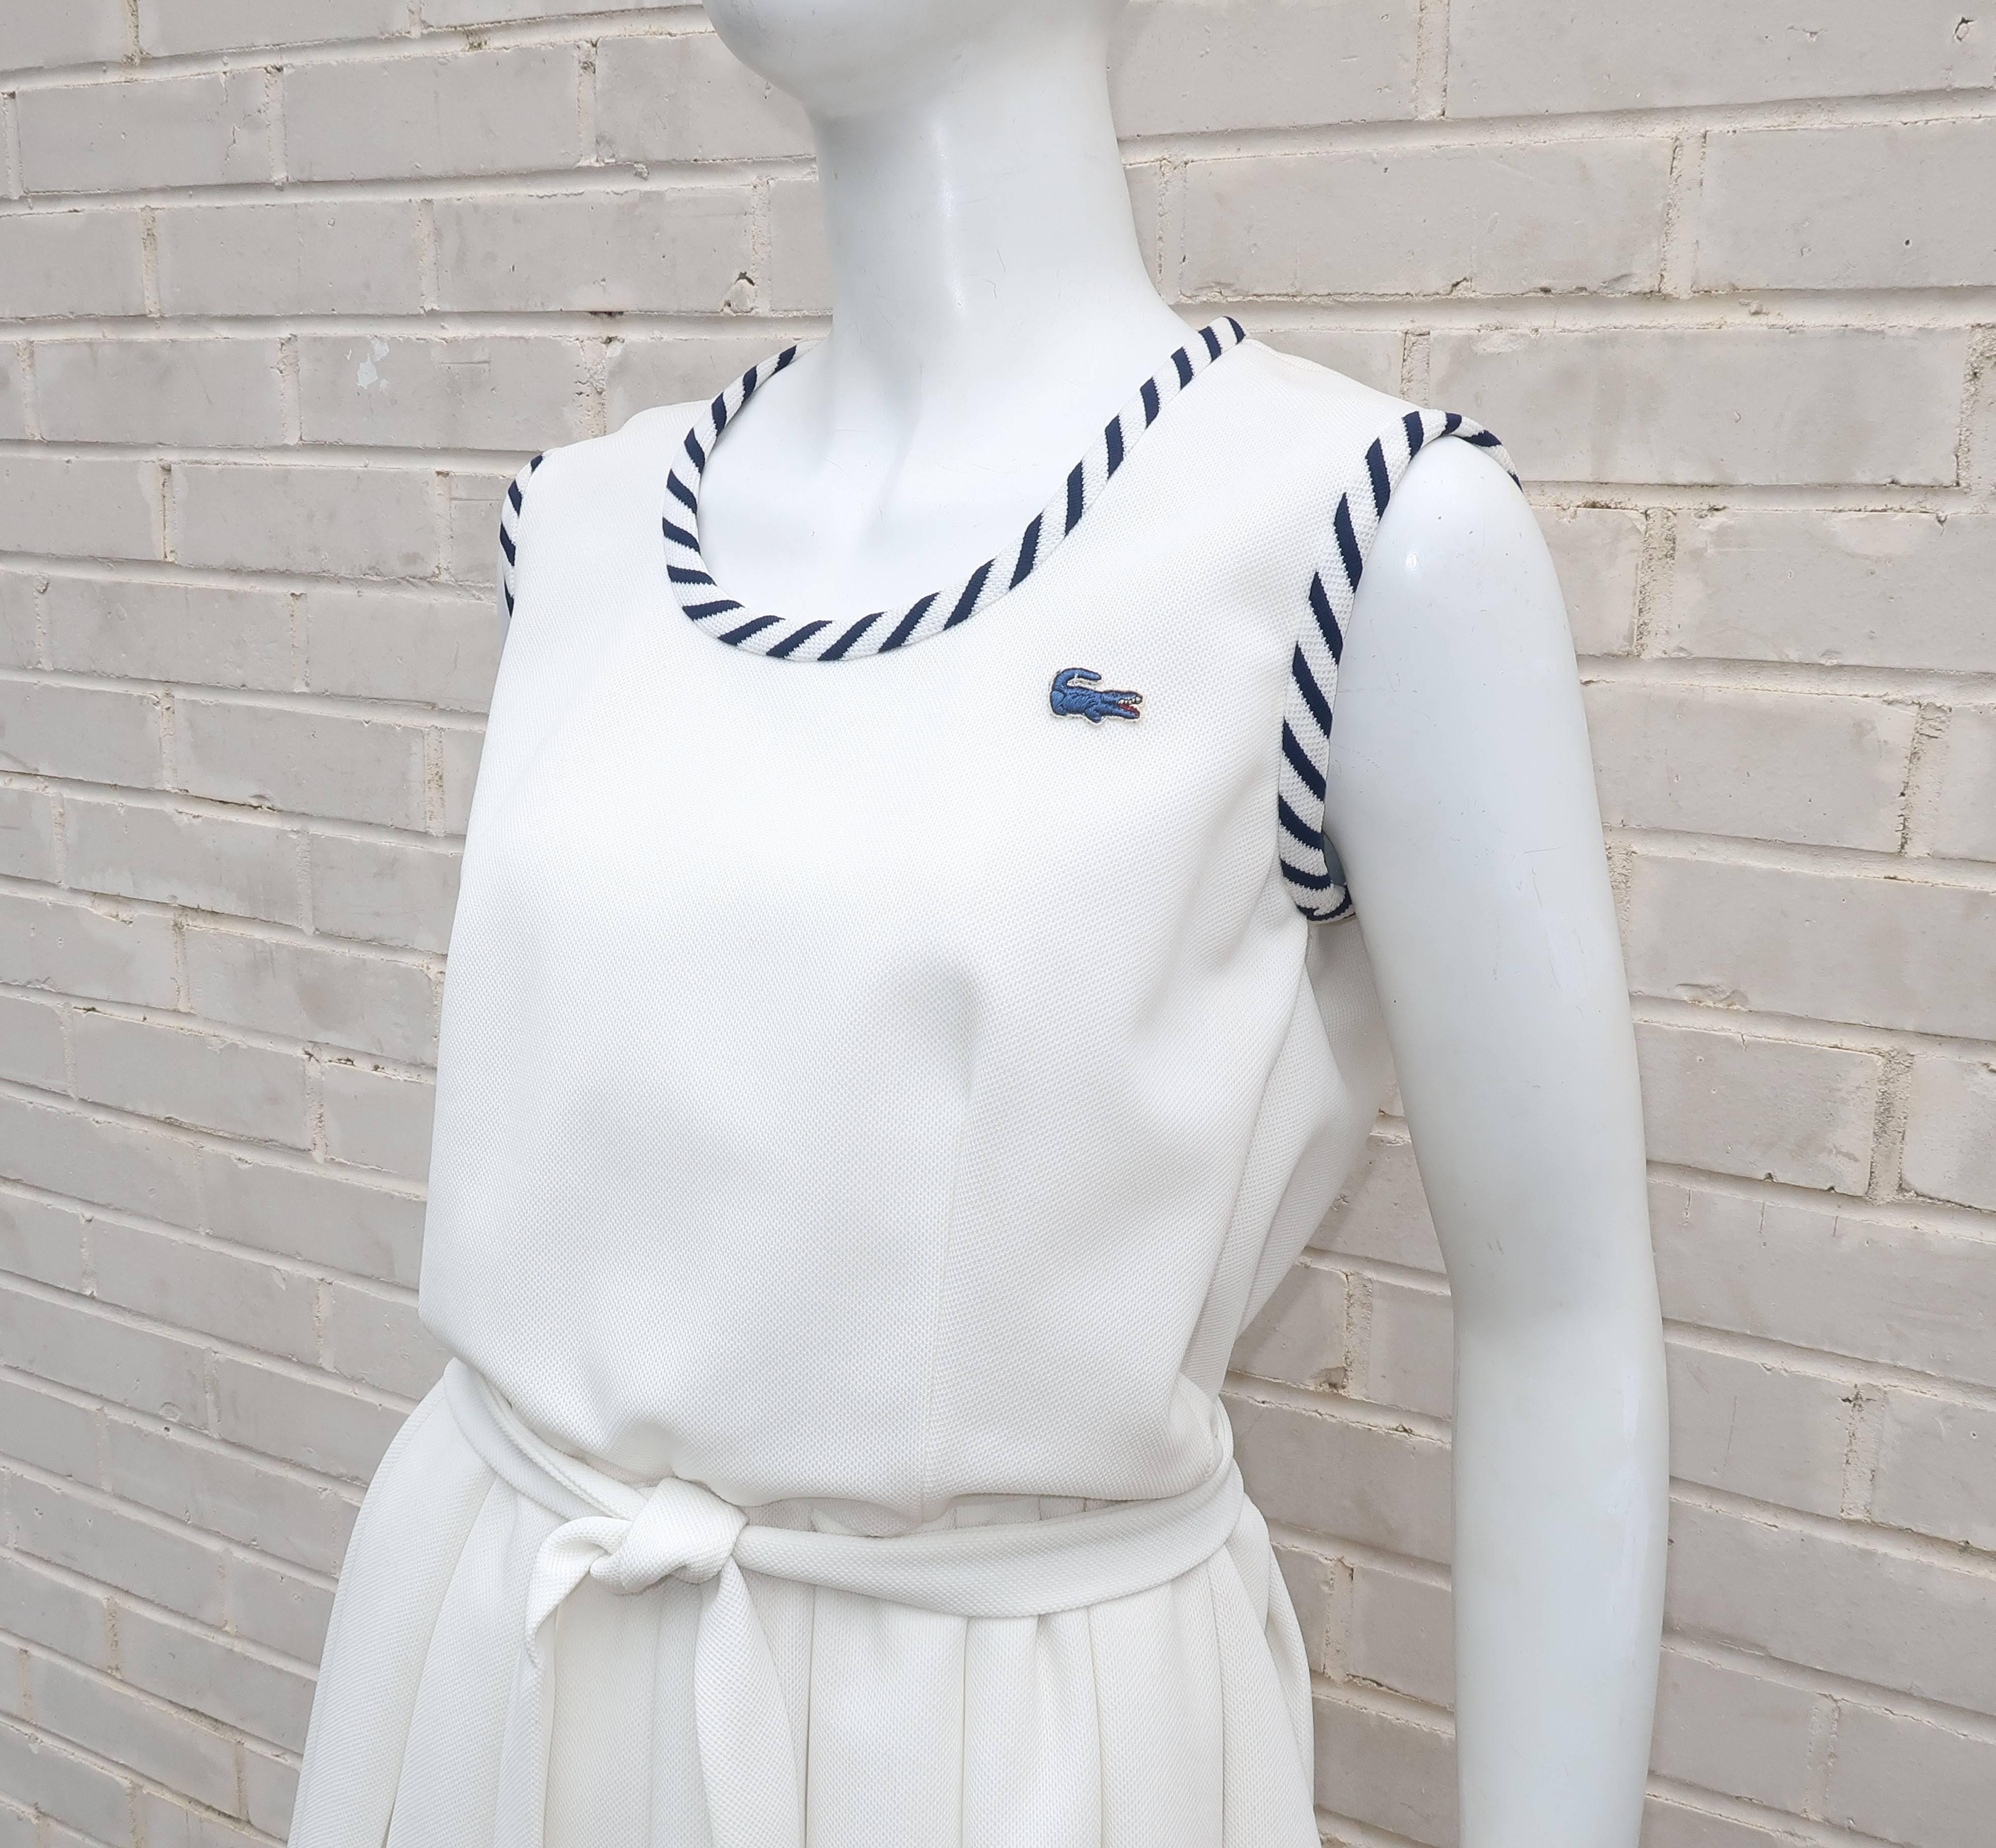 Tennis anyone?  Well it is 'love' at first sight with this 1970's Izod tennis dress complete with the iconic alligator made famous by Rene Lacoste and sold in the United States by sportswear maker, David Crystal.  The sleeveless white polyester